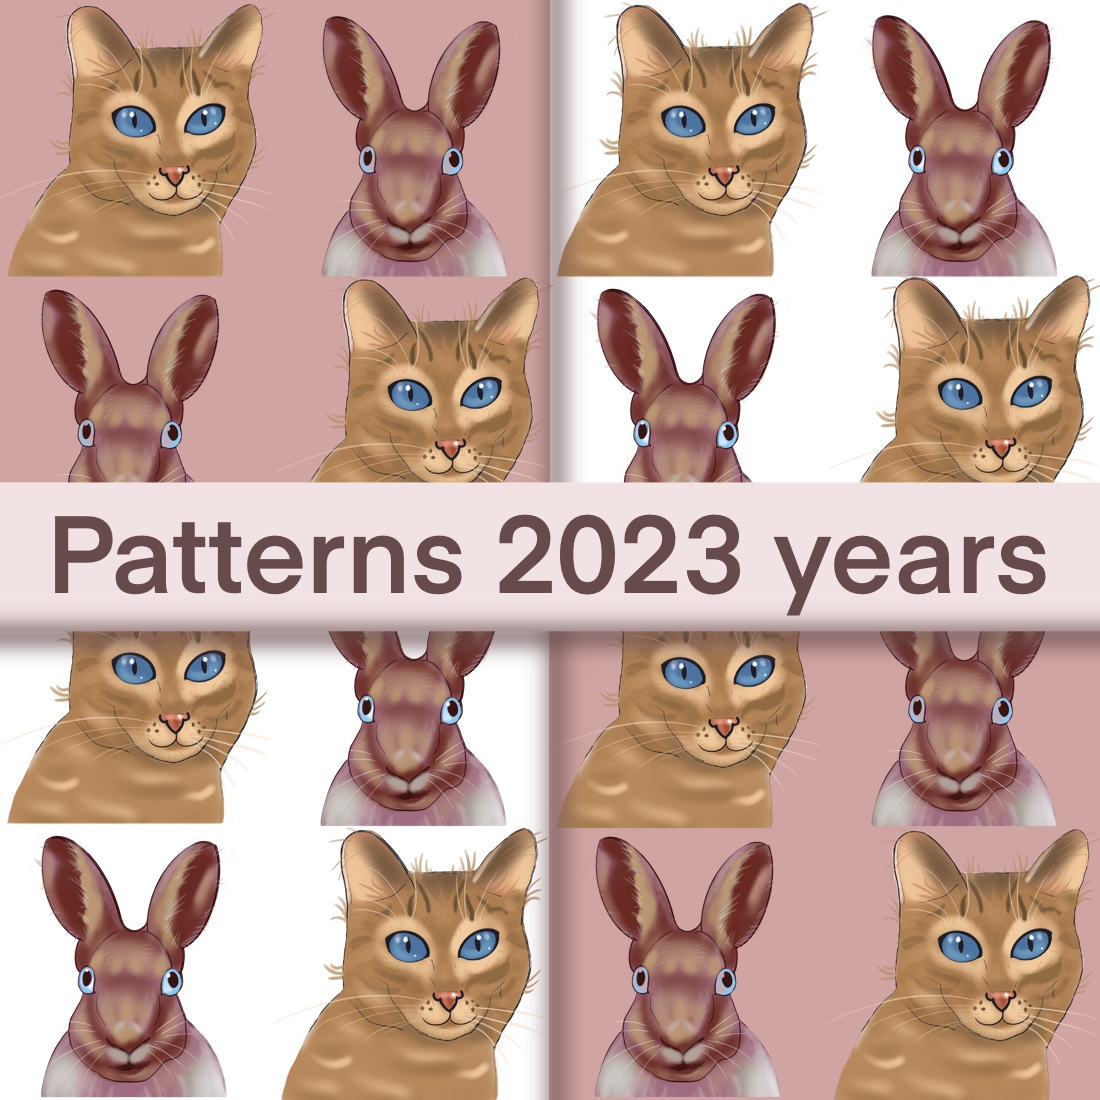 Rabbit and Cat Patterns Design cover image.